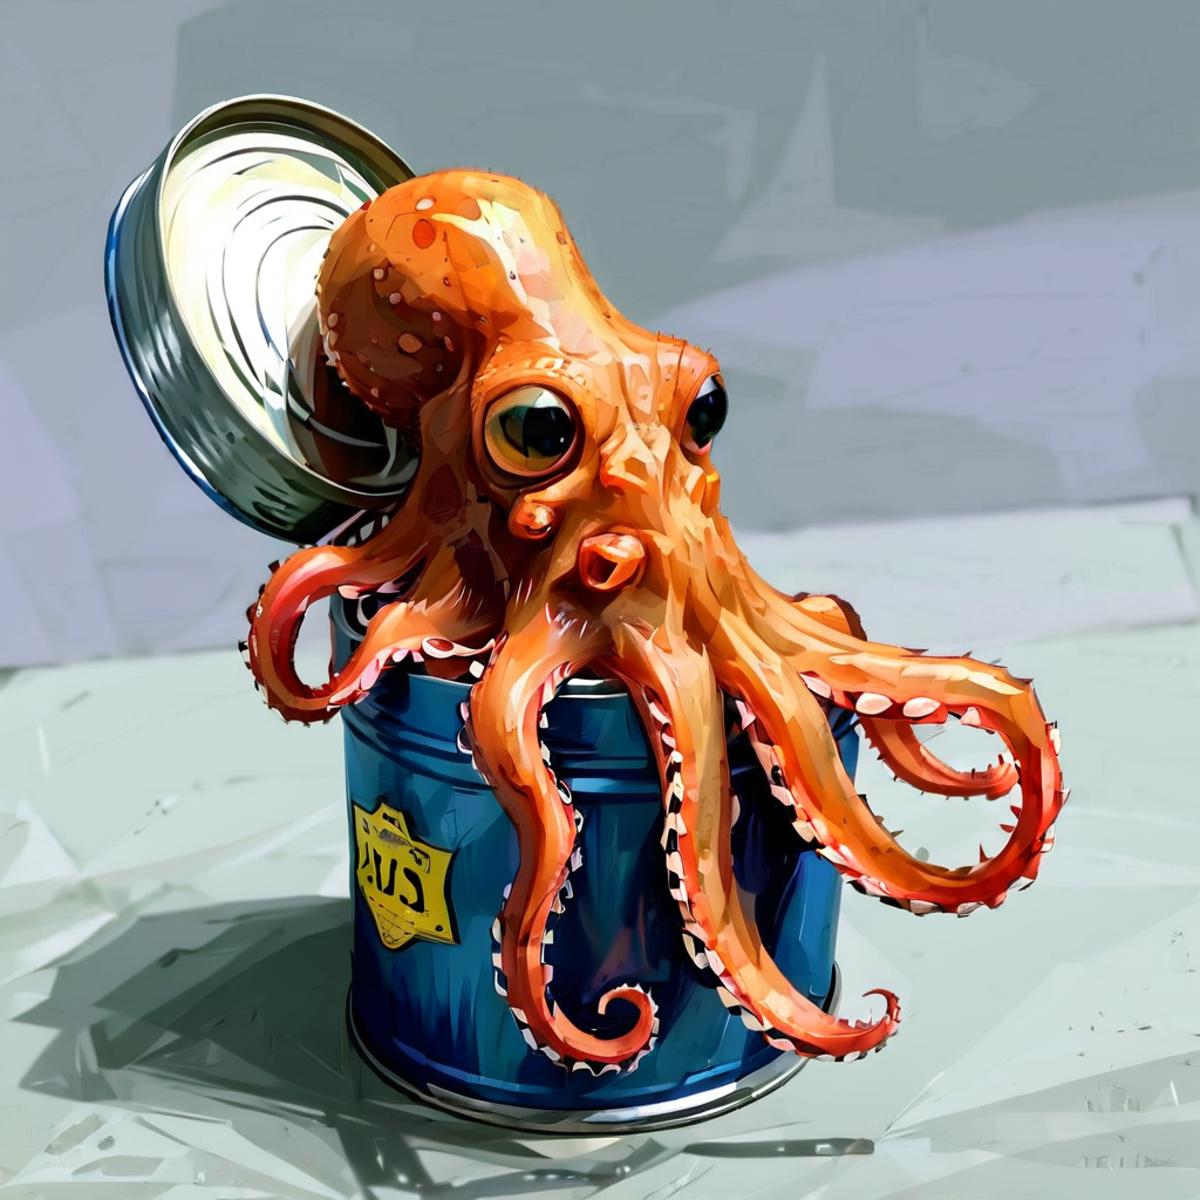 An artistic painting of a toy squid in a can.